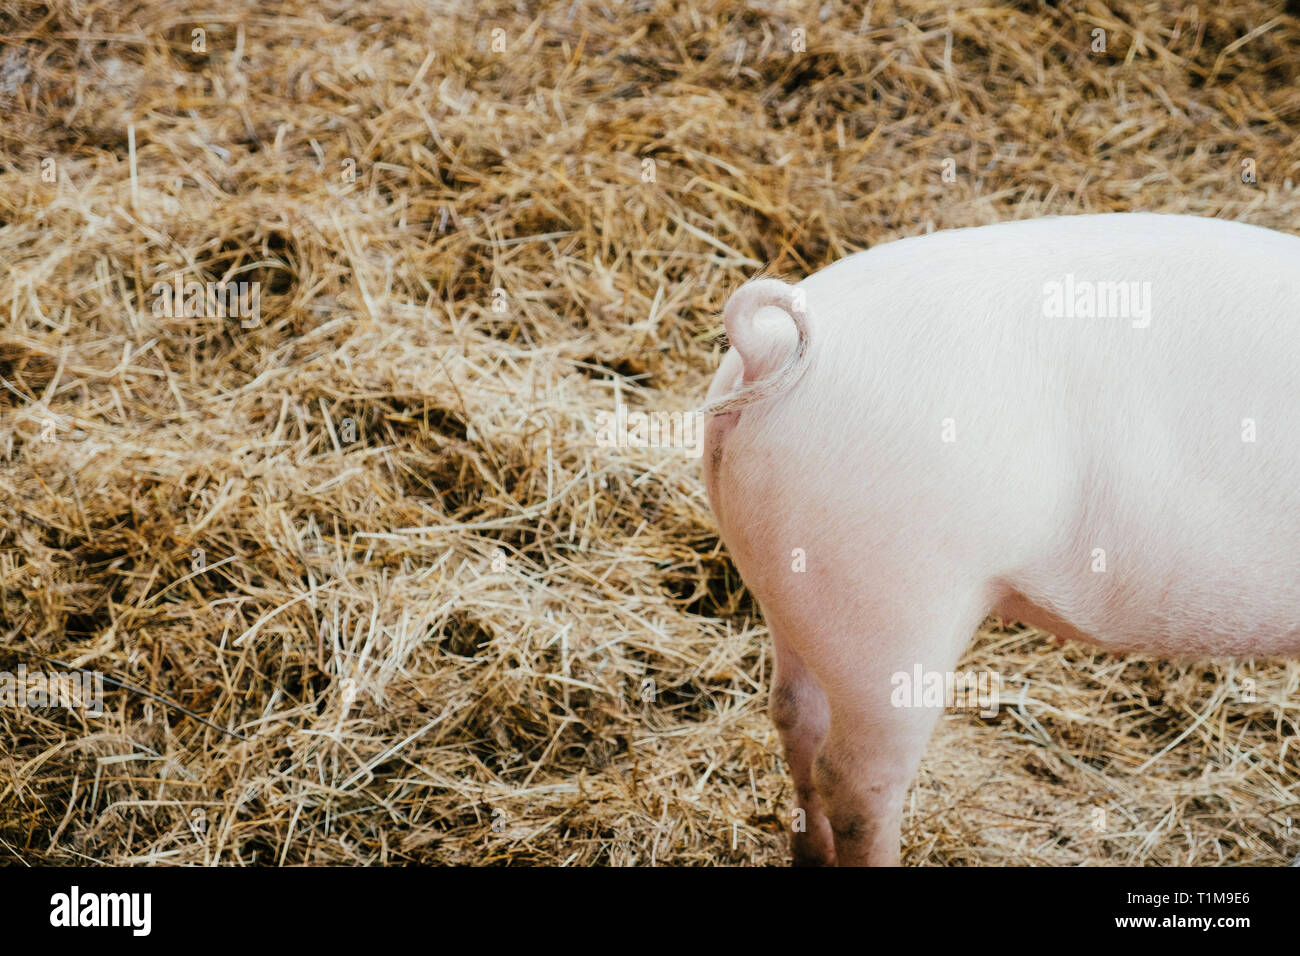 Curly tail on pink piglet in hay Stock Photo